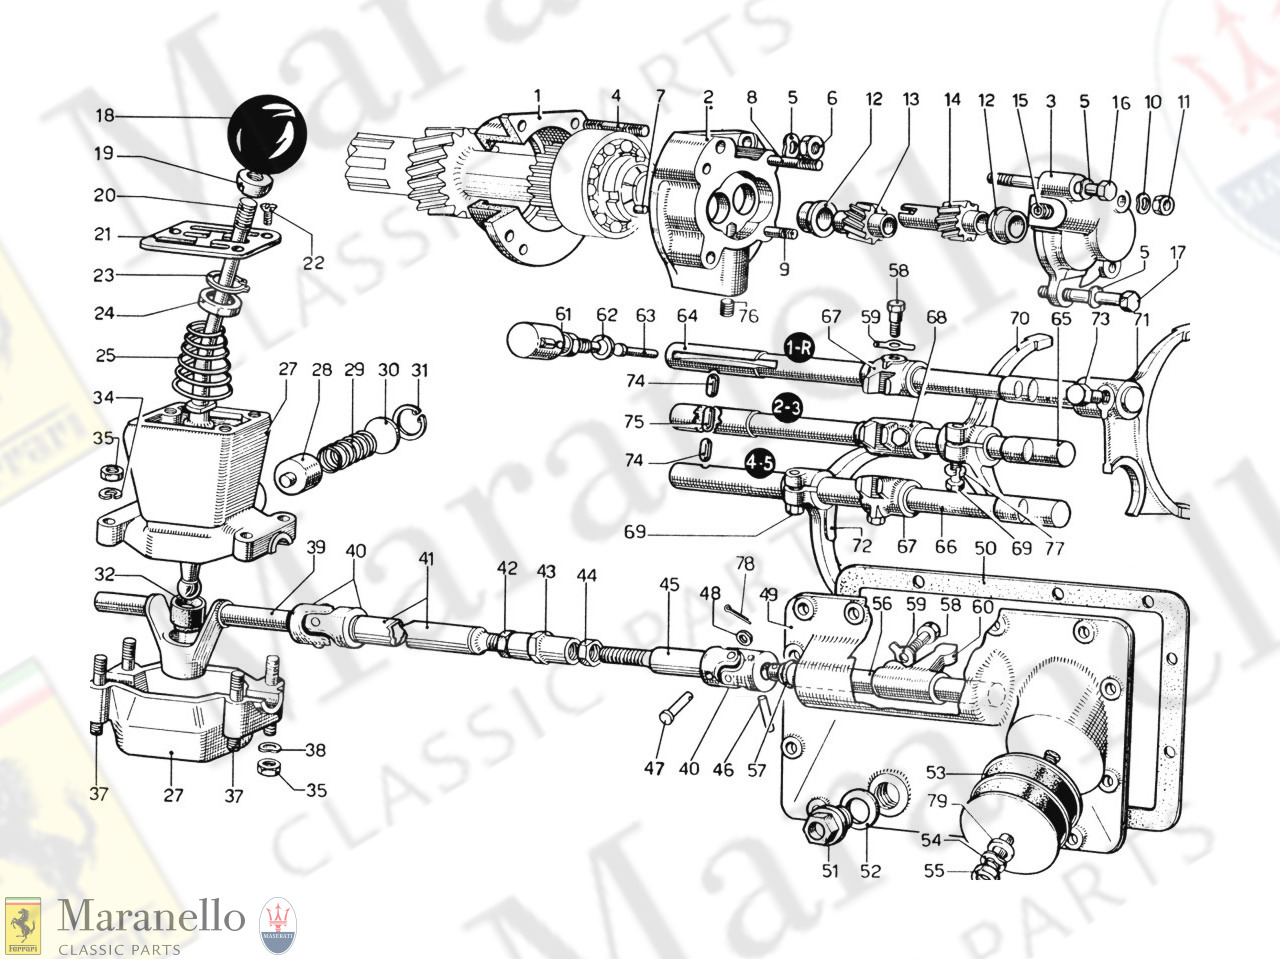 020A - Gearbox Controls & Oil Pump (1974 Revision - Cars With Air Pollution System)